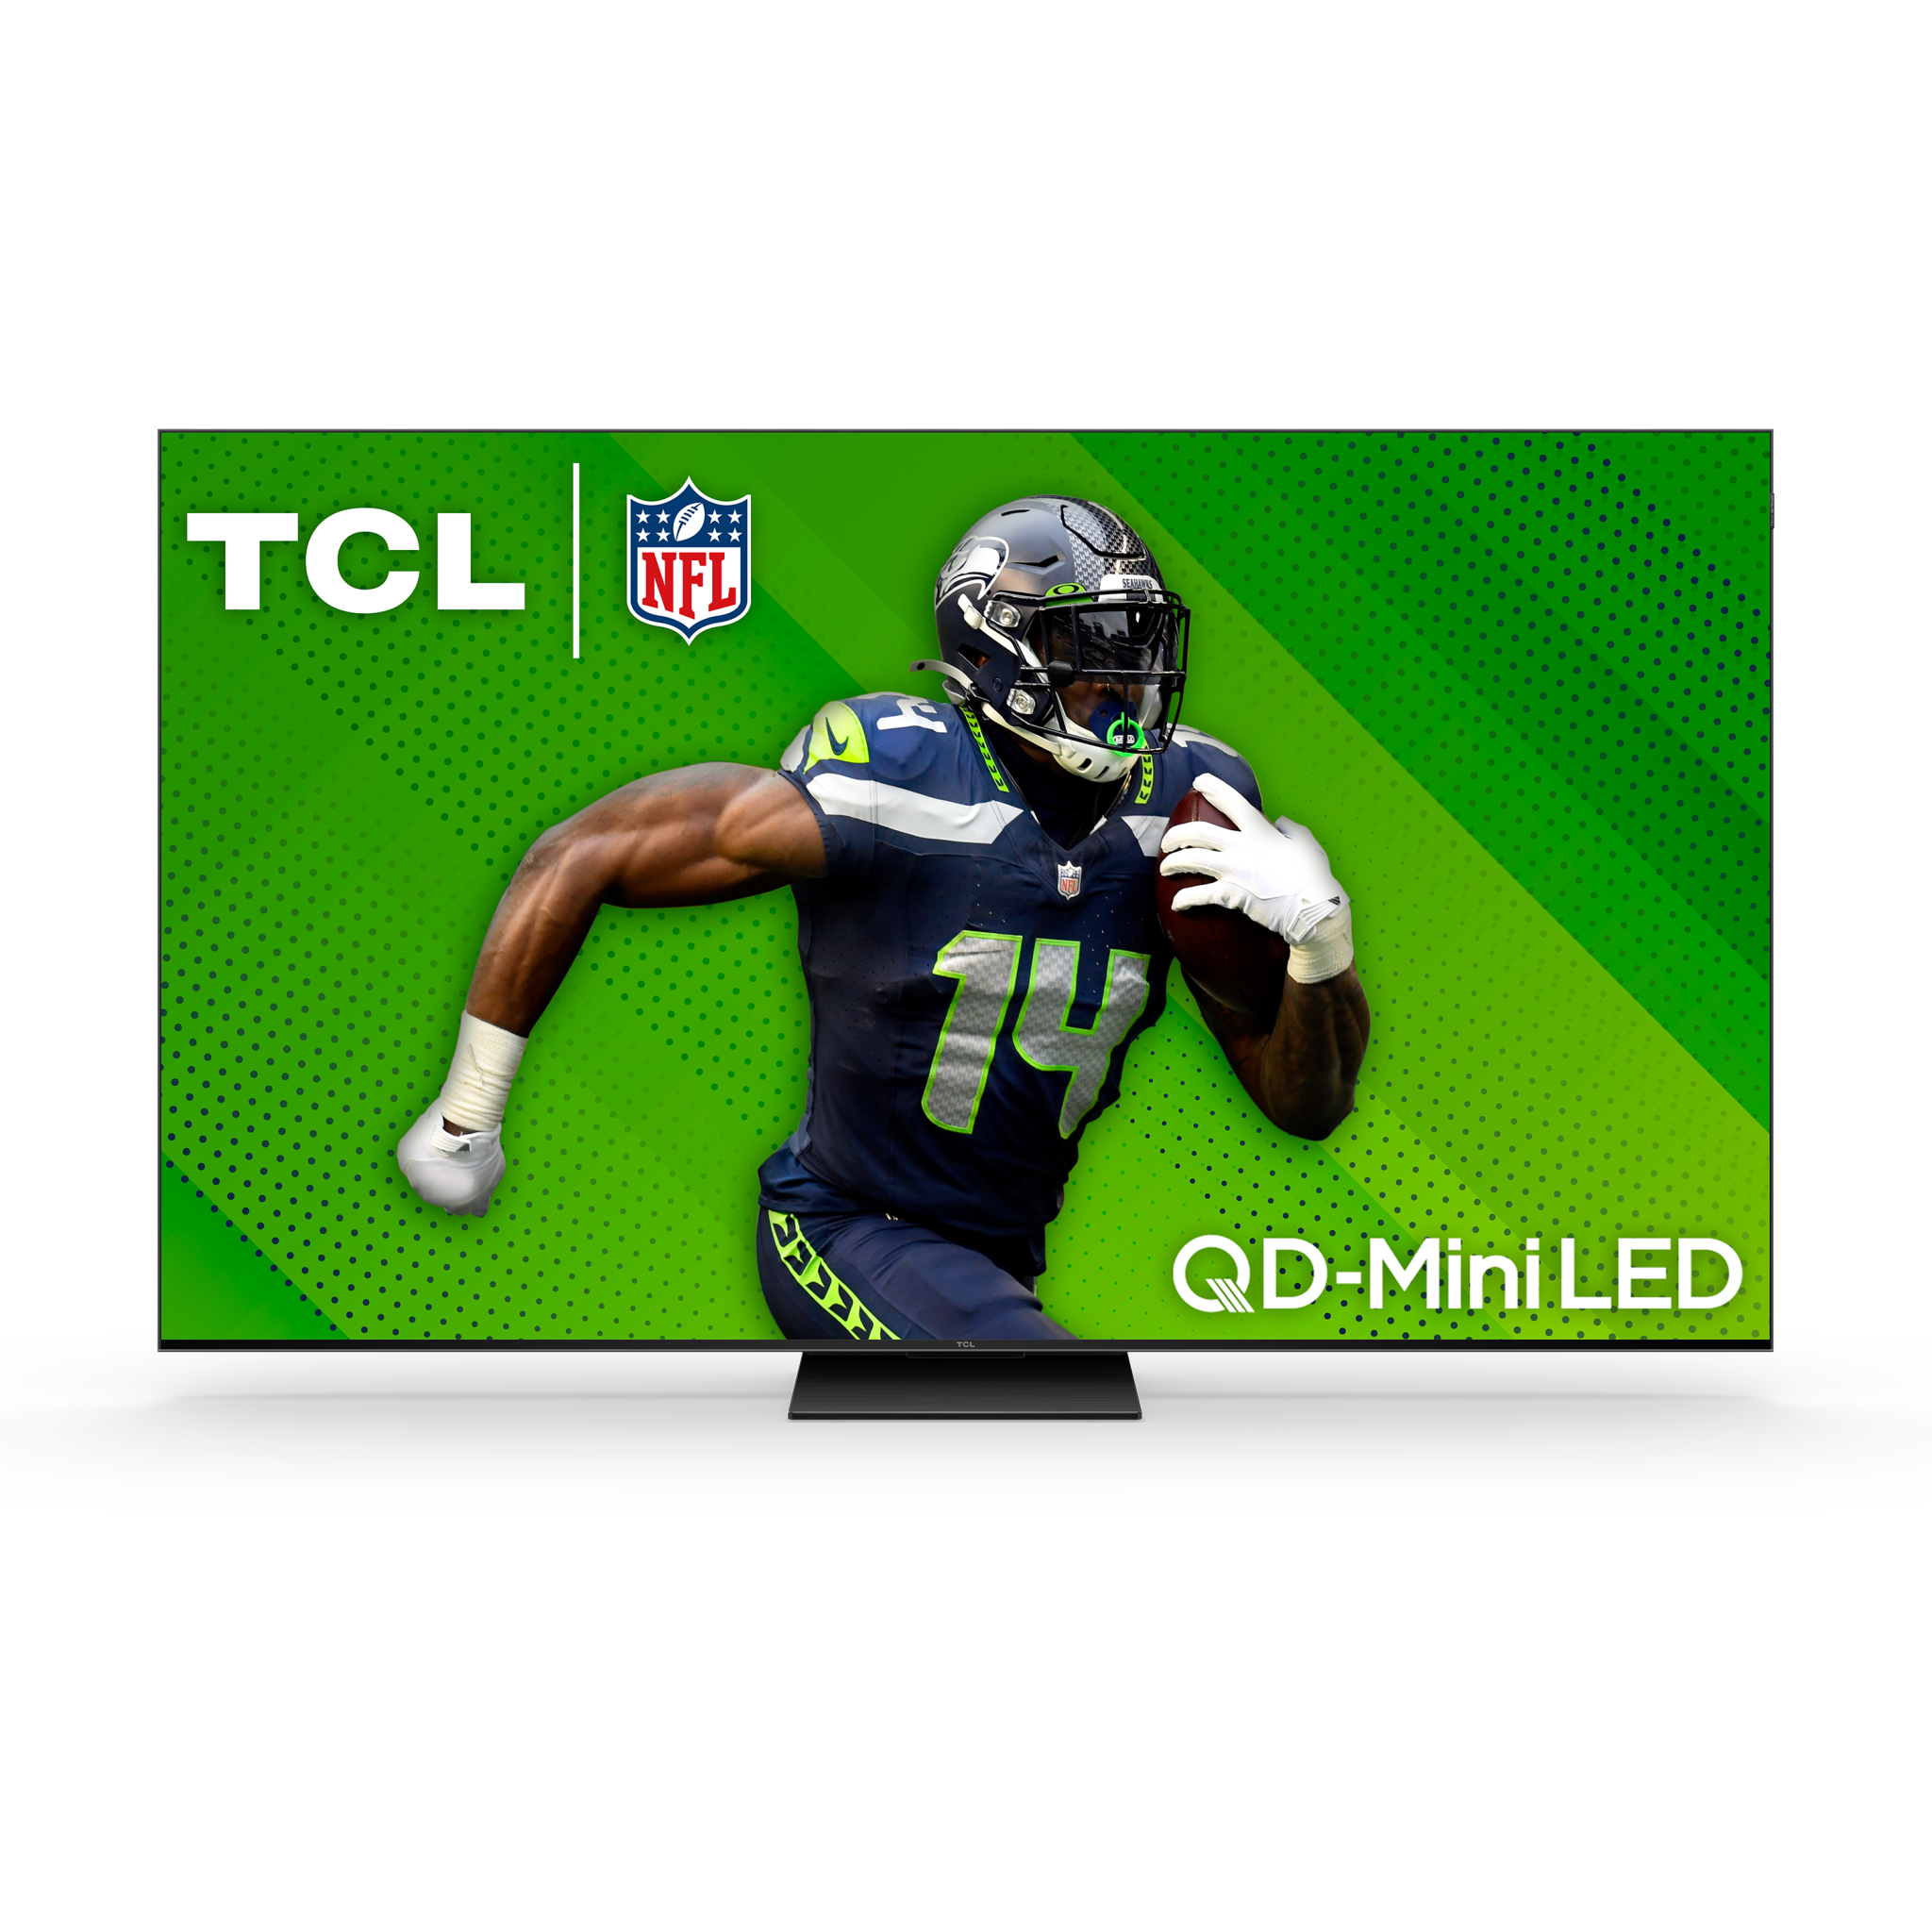 Why TCL's Mini LED QLED technology is about to change TV forever